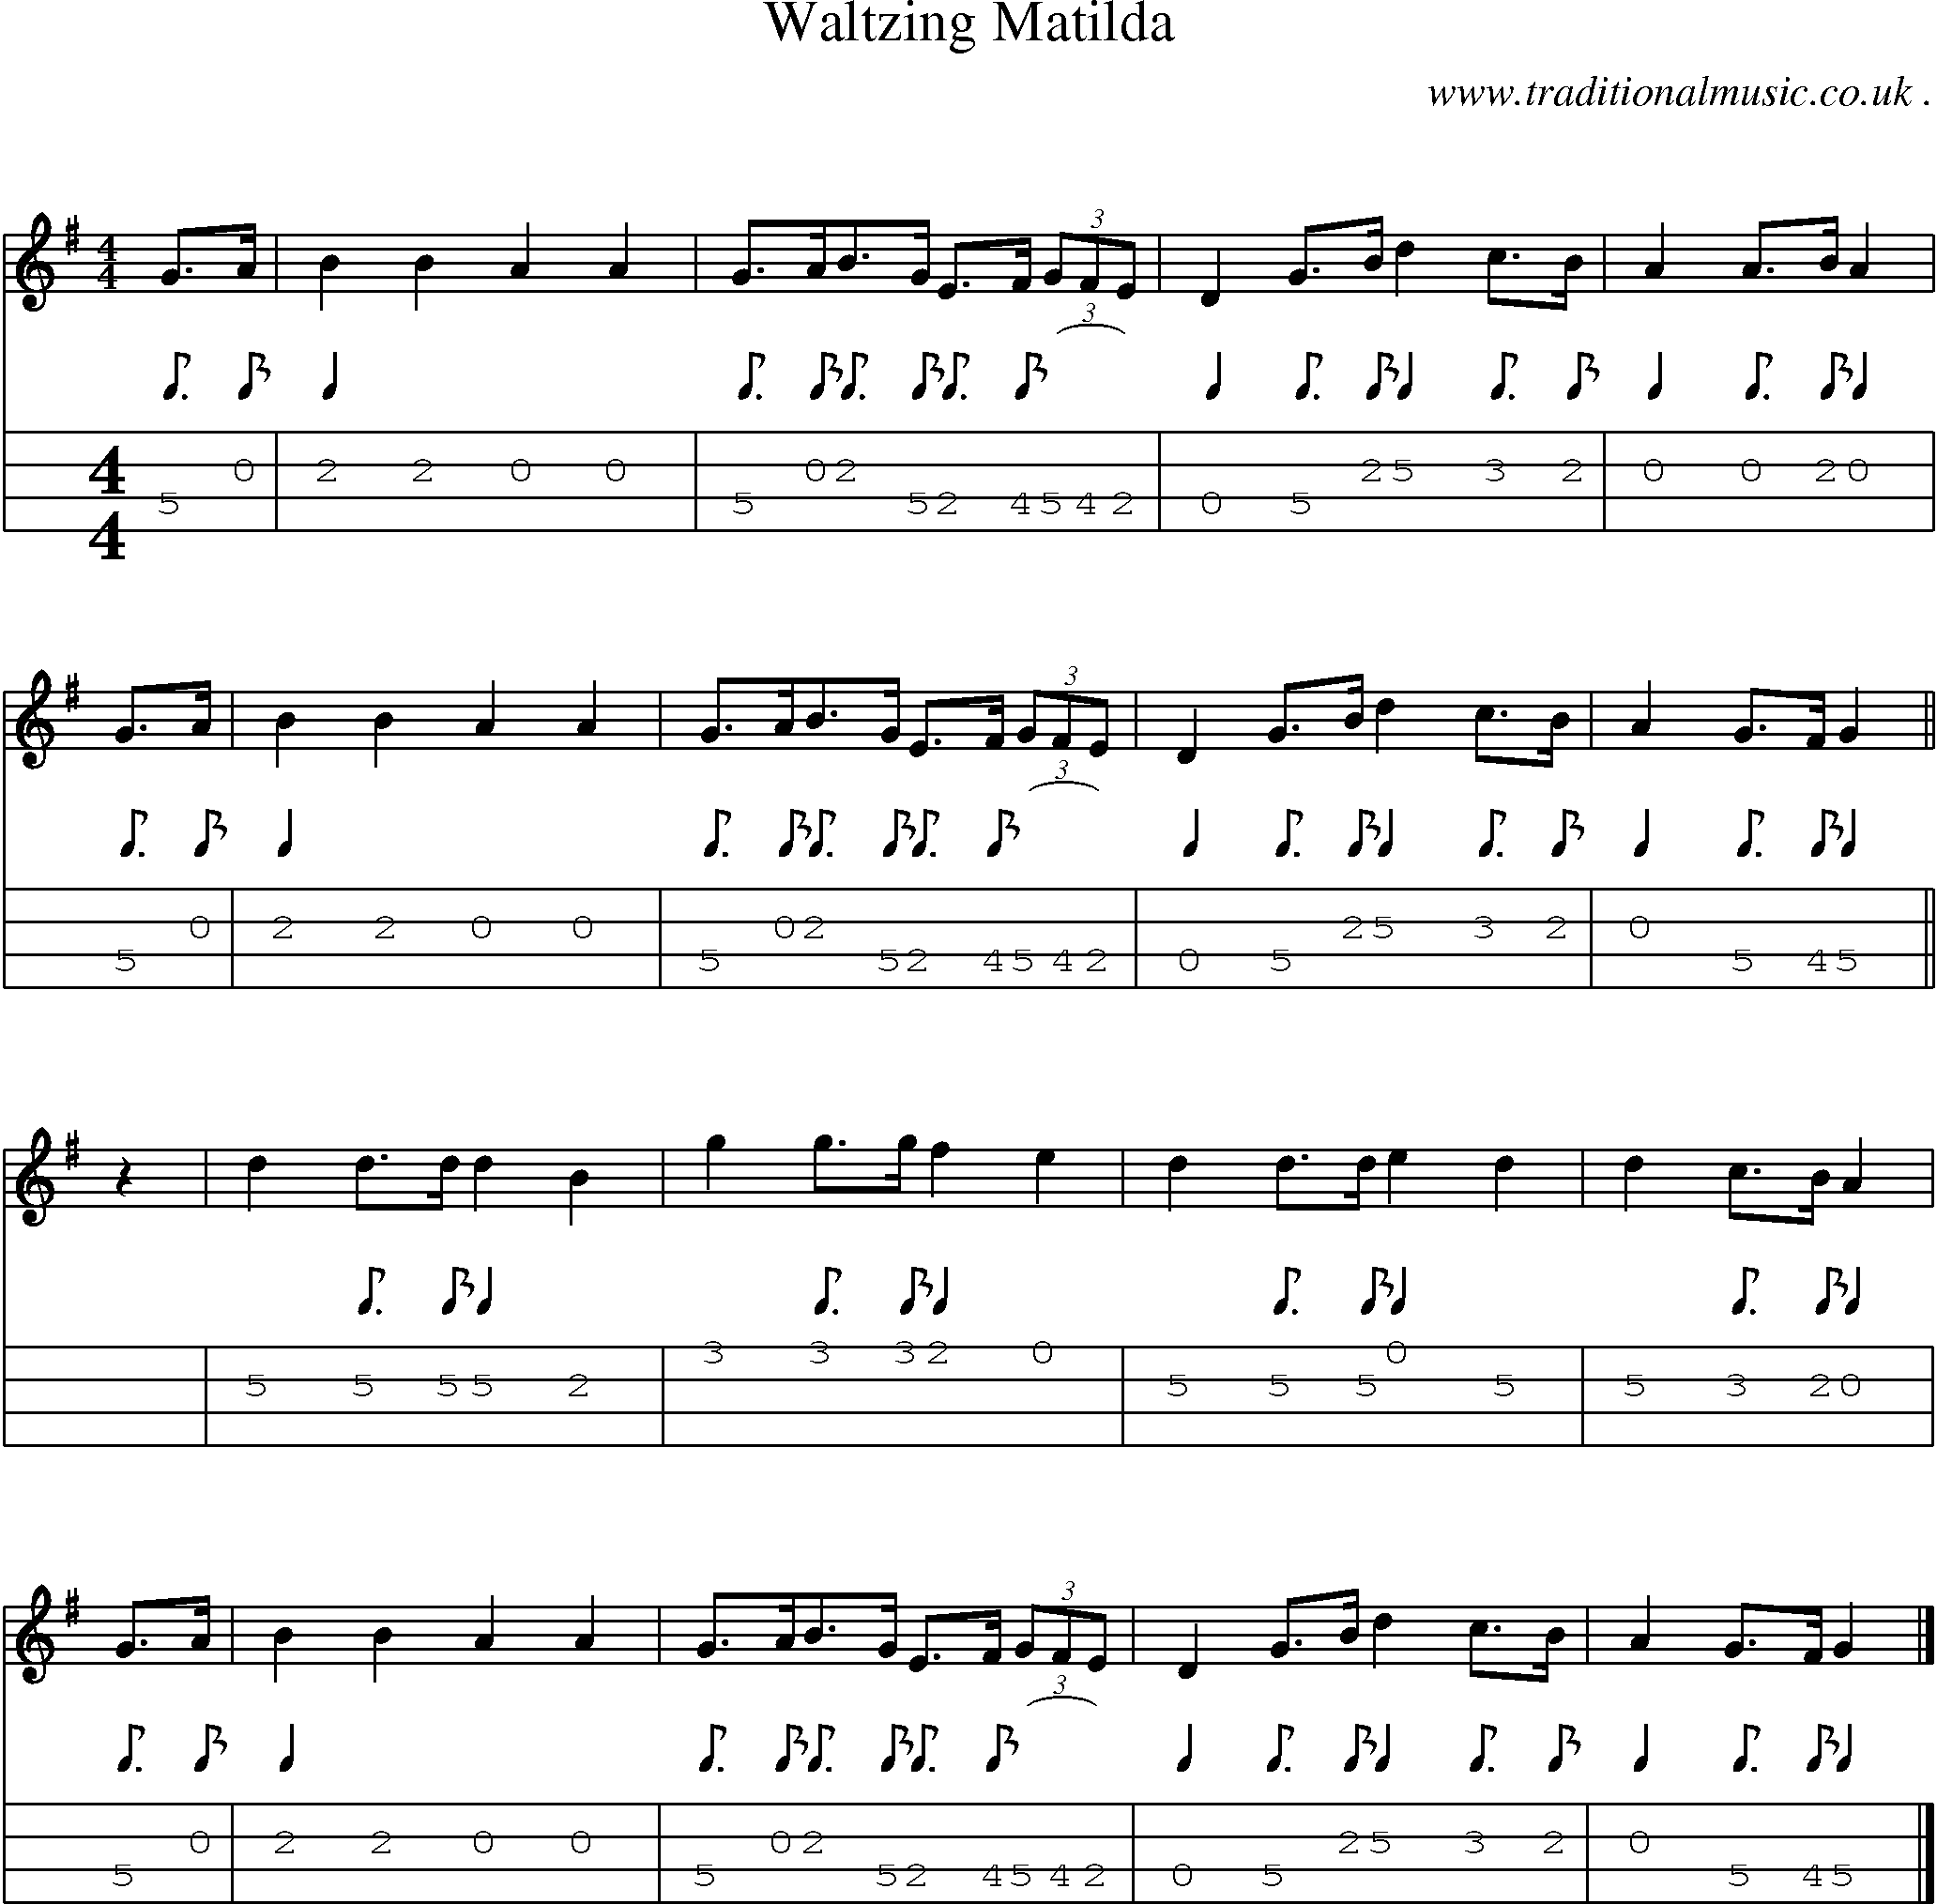 Sheet-music  score, Chords and Mandolin Tabs for Waltzing Matilda